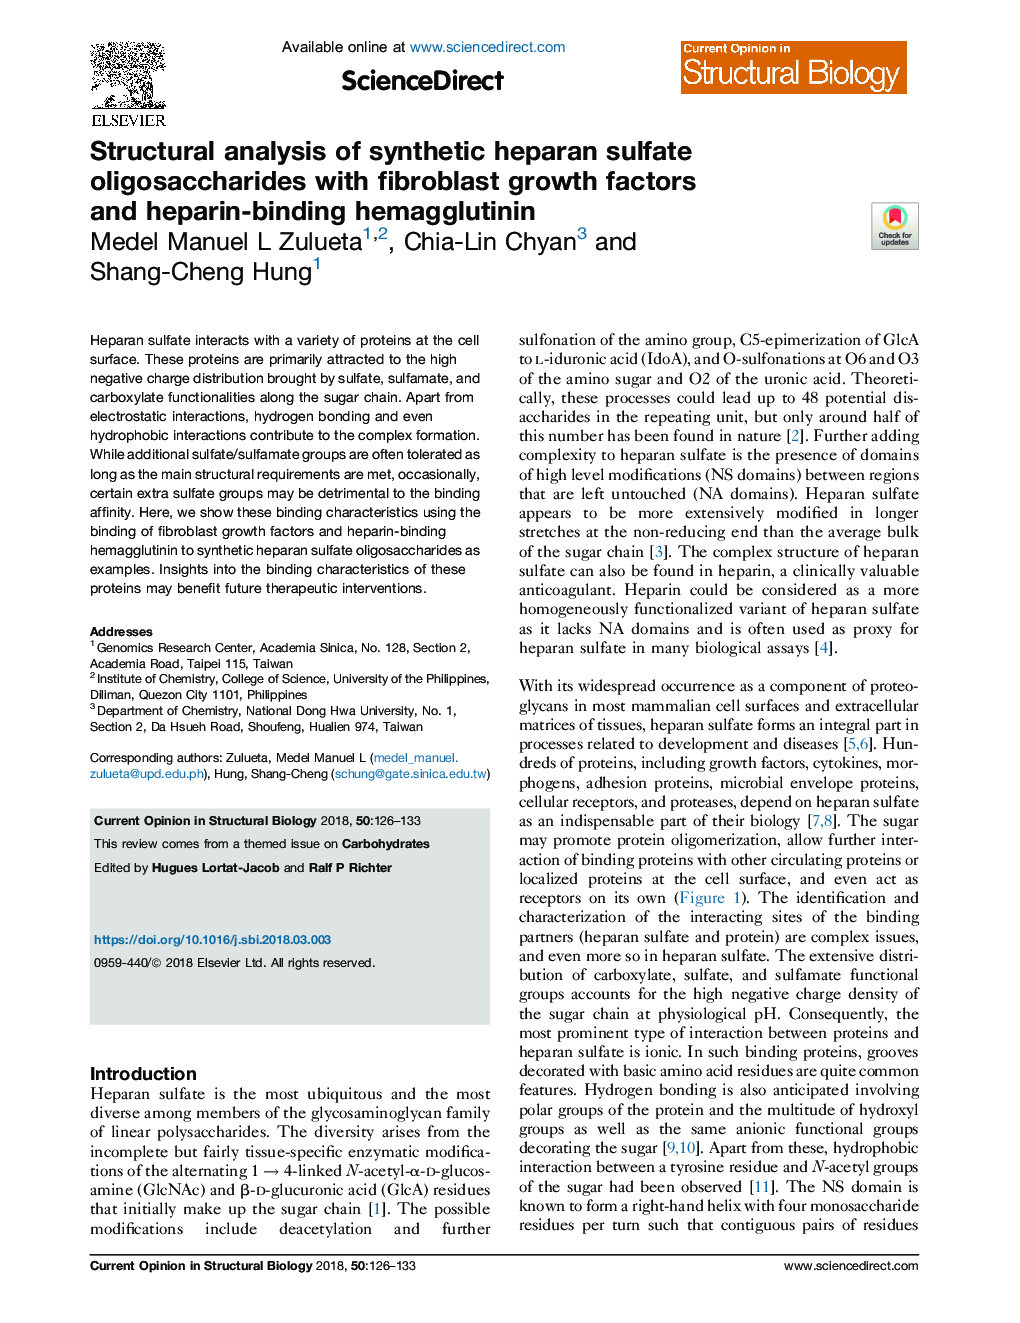 Structural analysis of synthetic heparan sulfate oligosaccharides with fibroblast growth factors and heparin-binding hemagglutinin